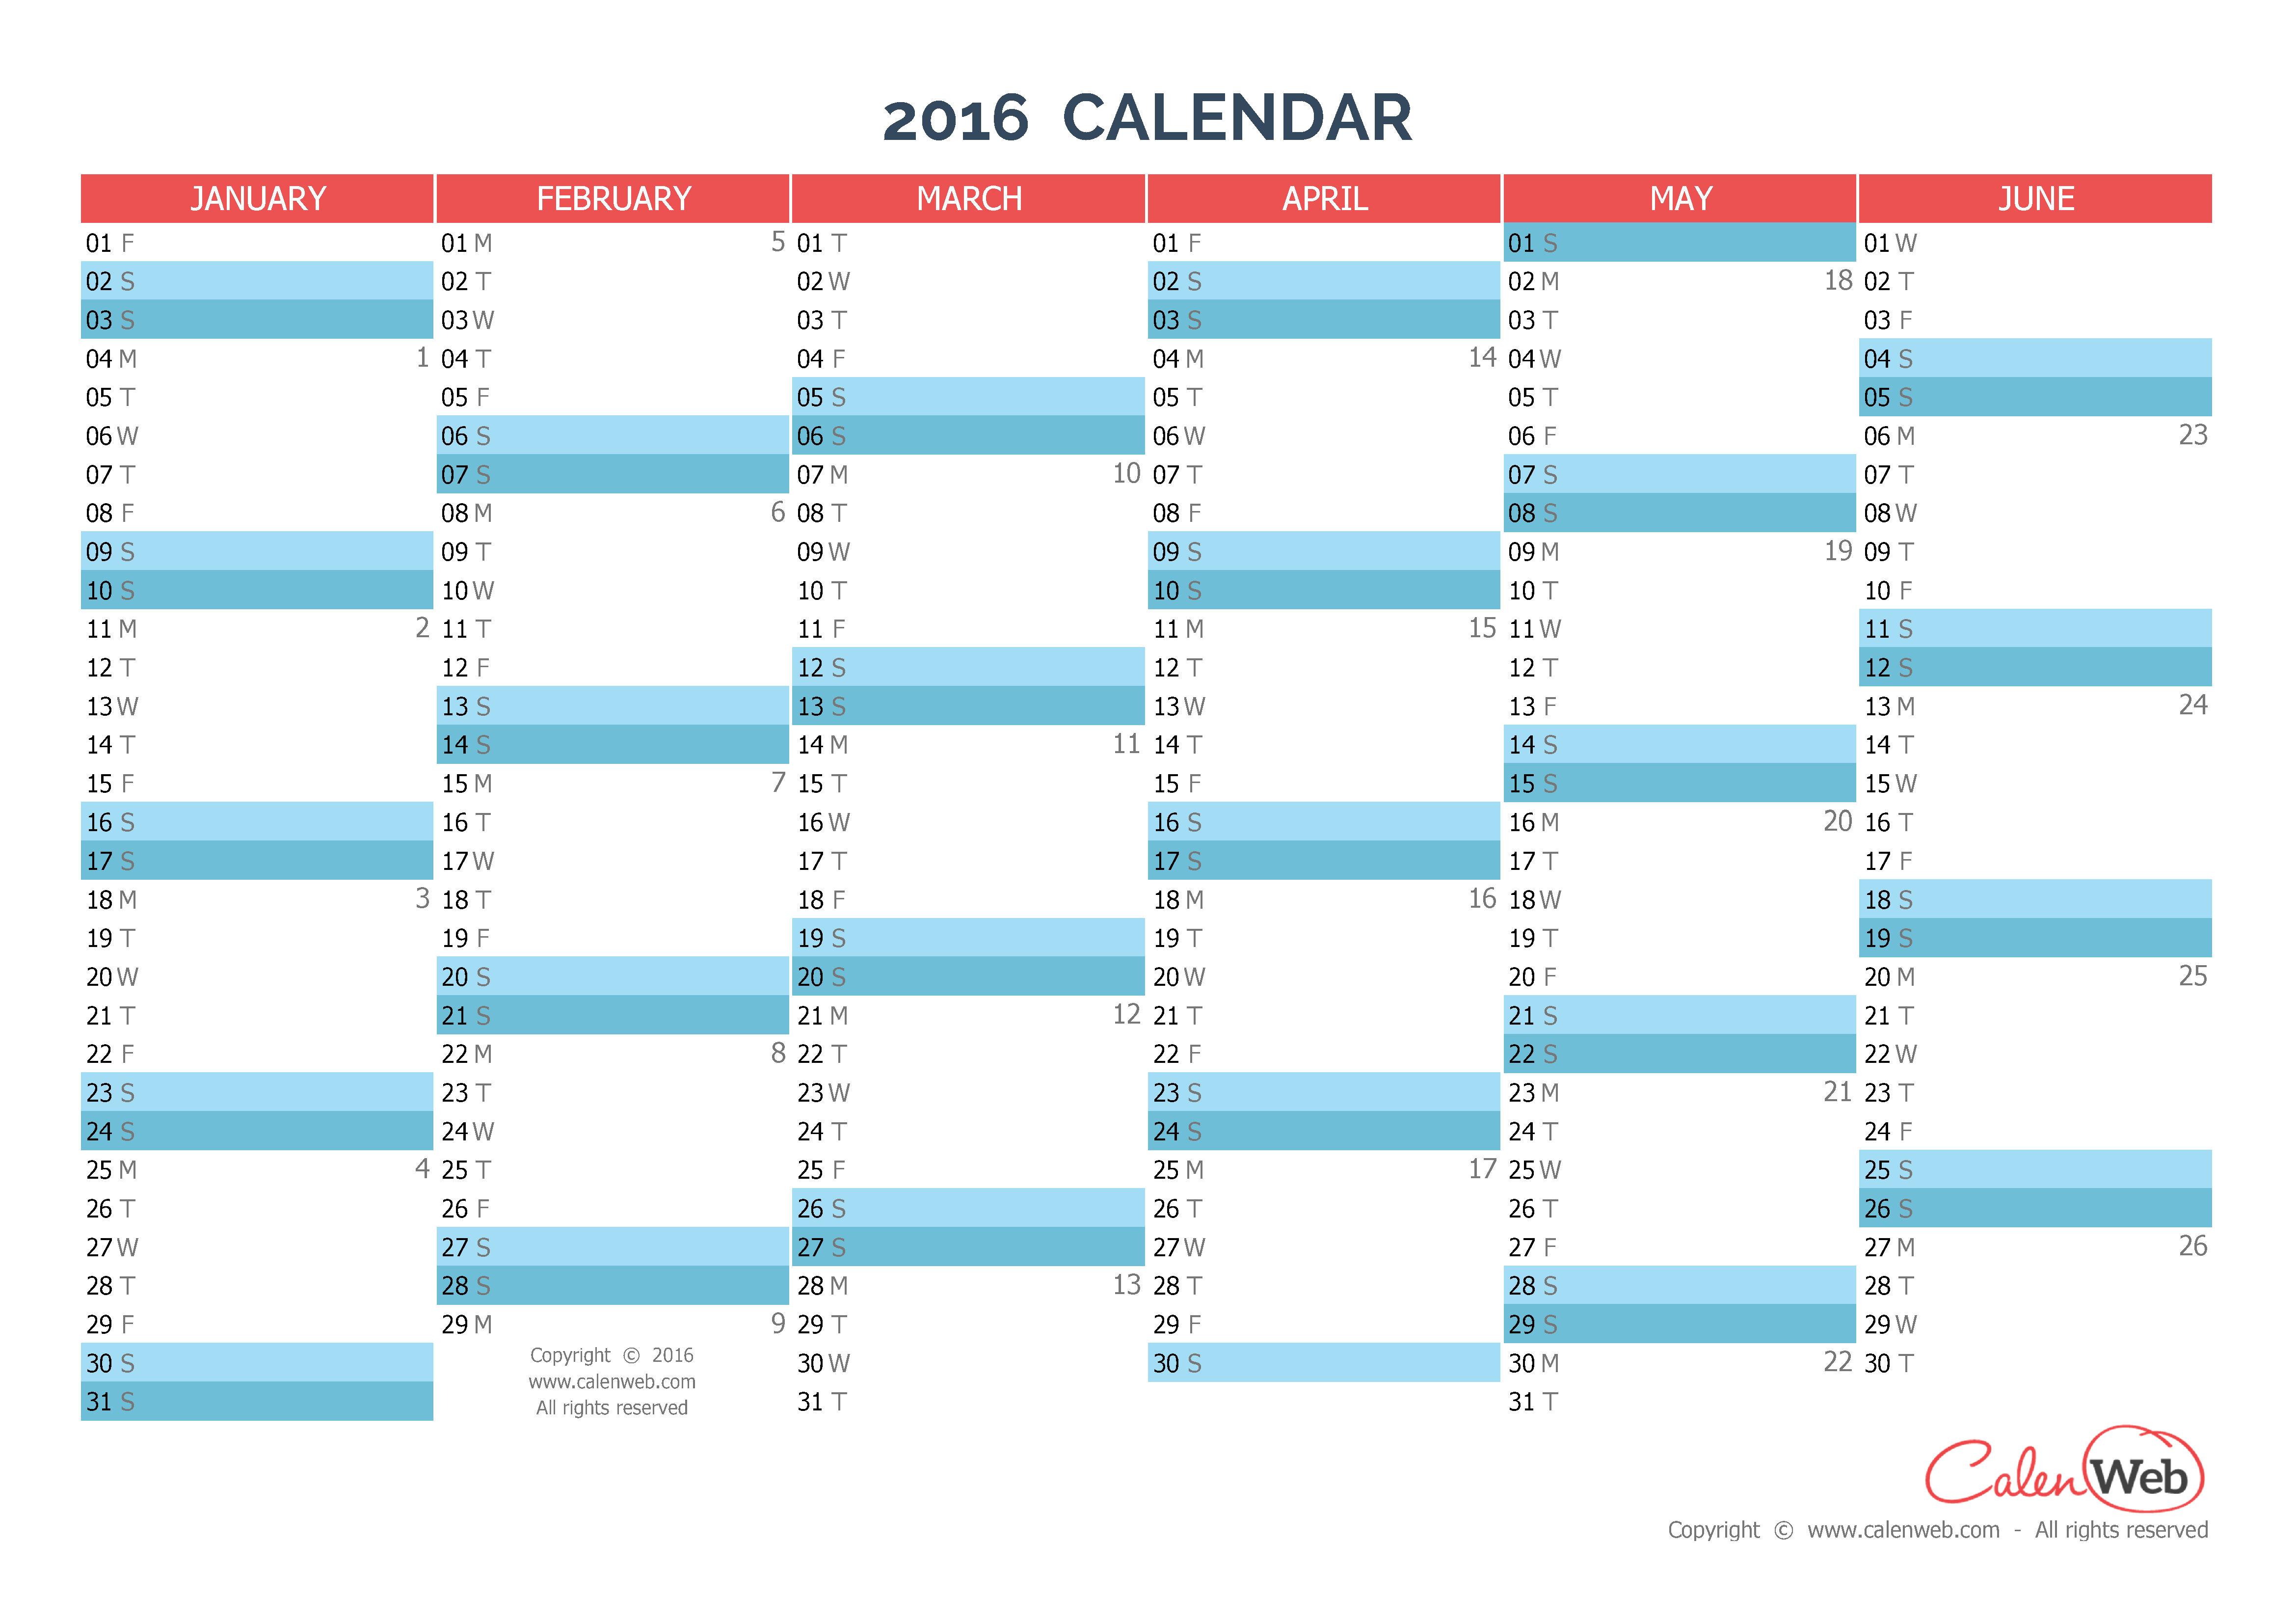 Calendrier planning 2016